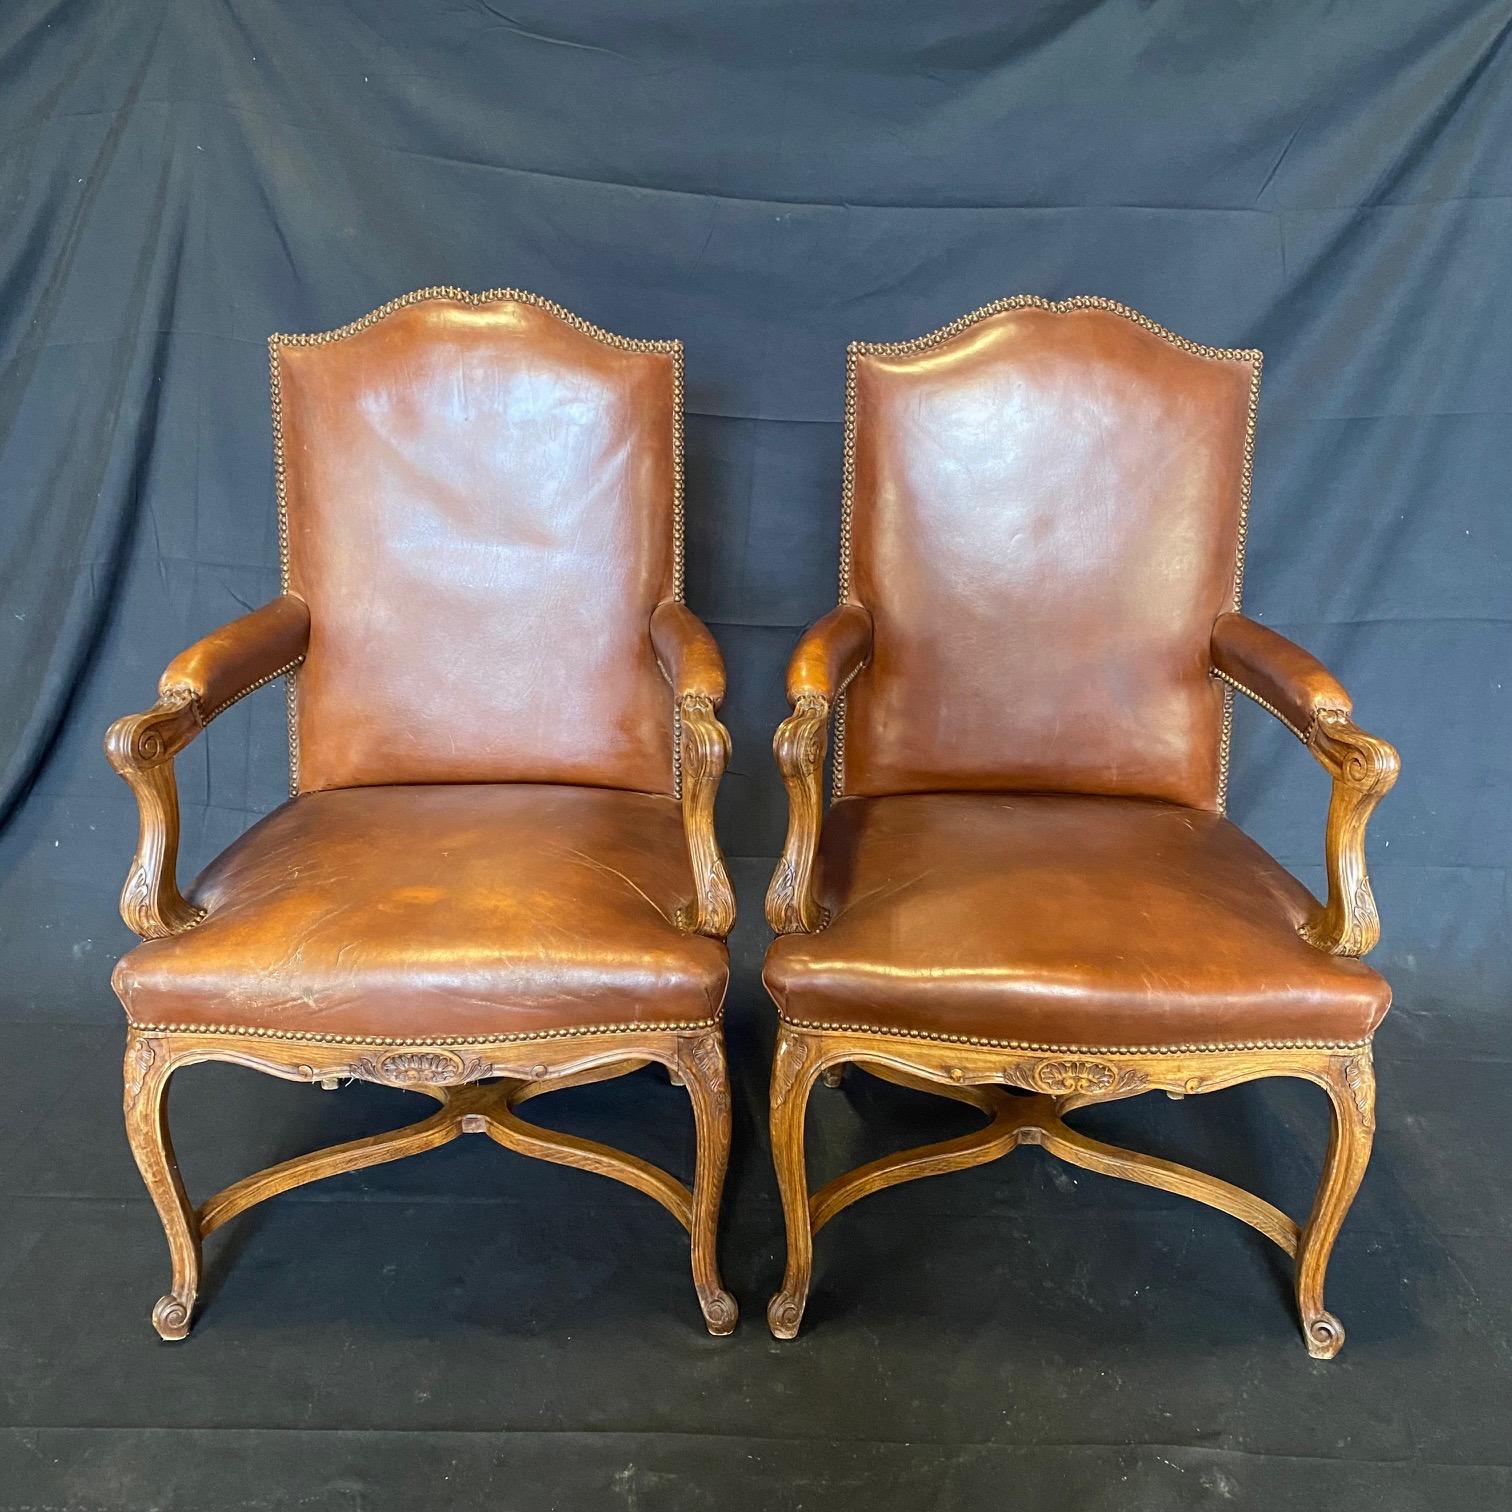 A set of three Louis XVI style vintage French carved wood and leather upholstered armchairs from the early 20th century featuring elegantly shaped backs, flanked within prominent shoulders that flow gently down onto the arms which terminate into